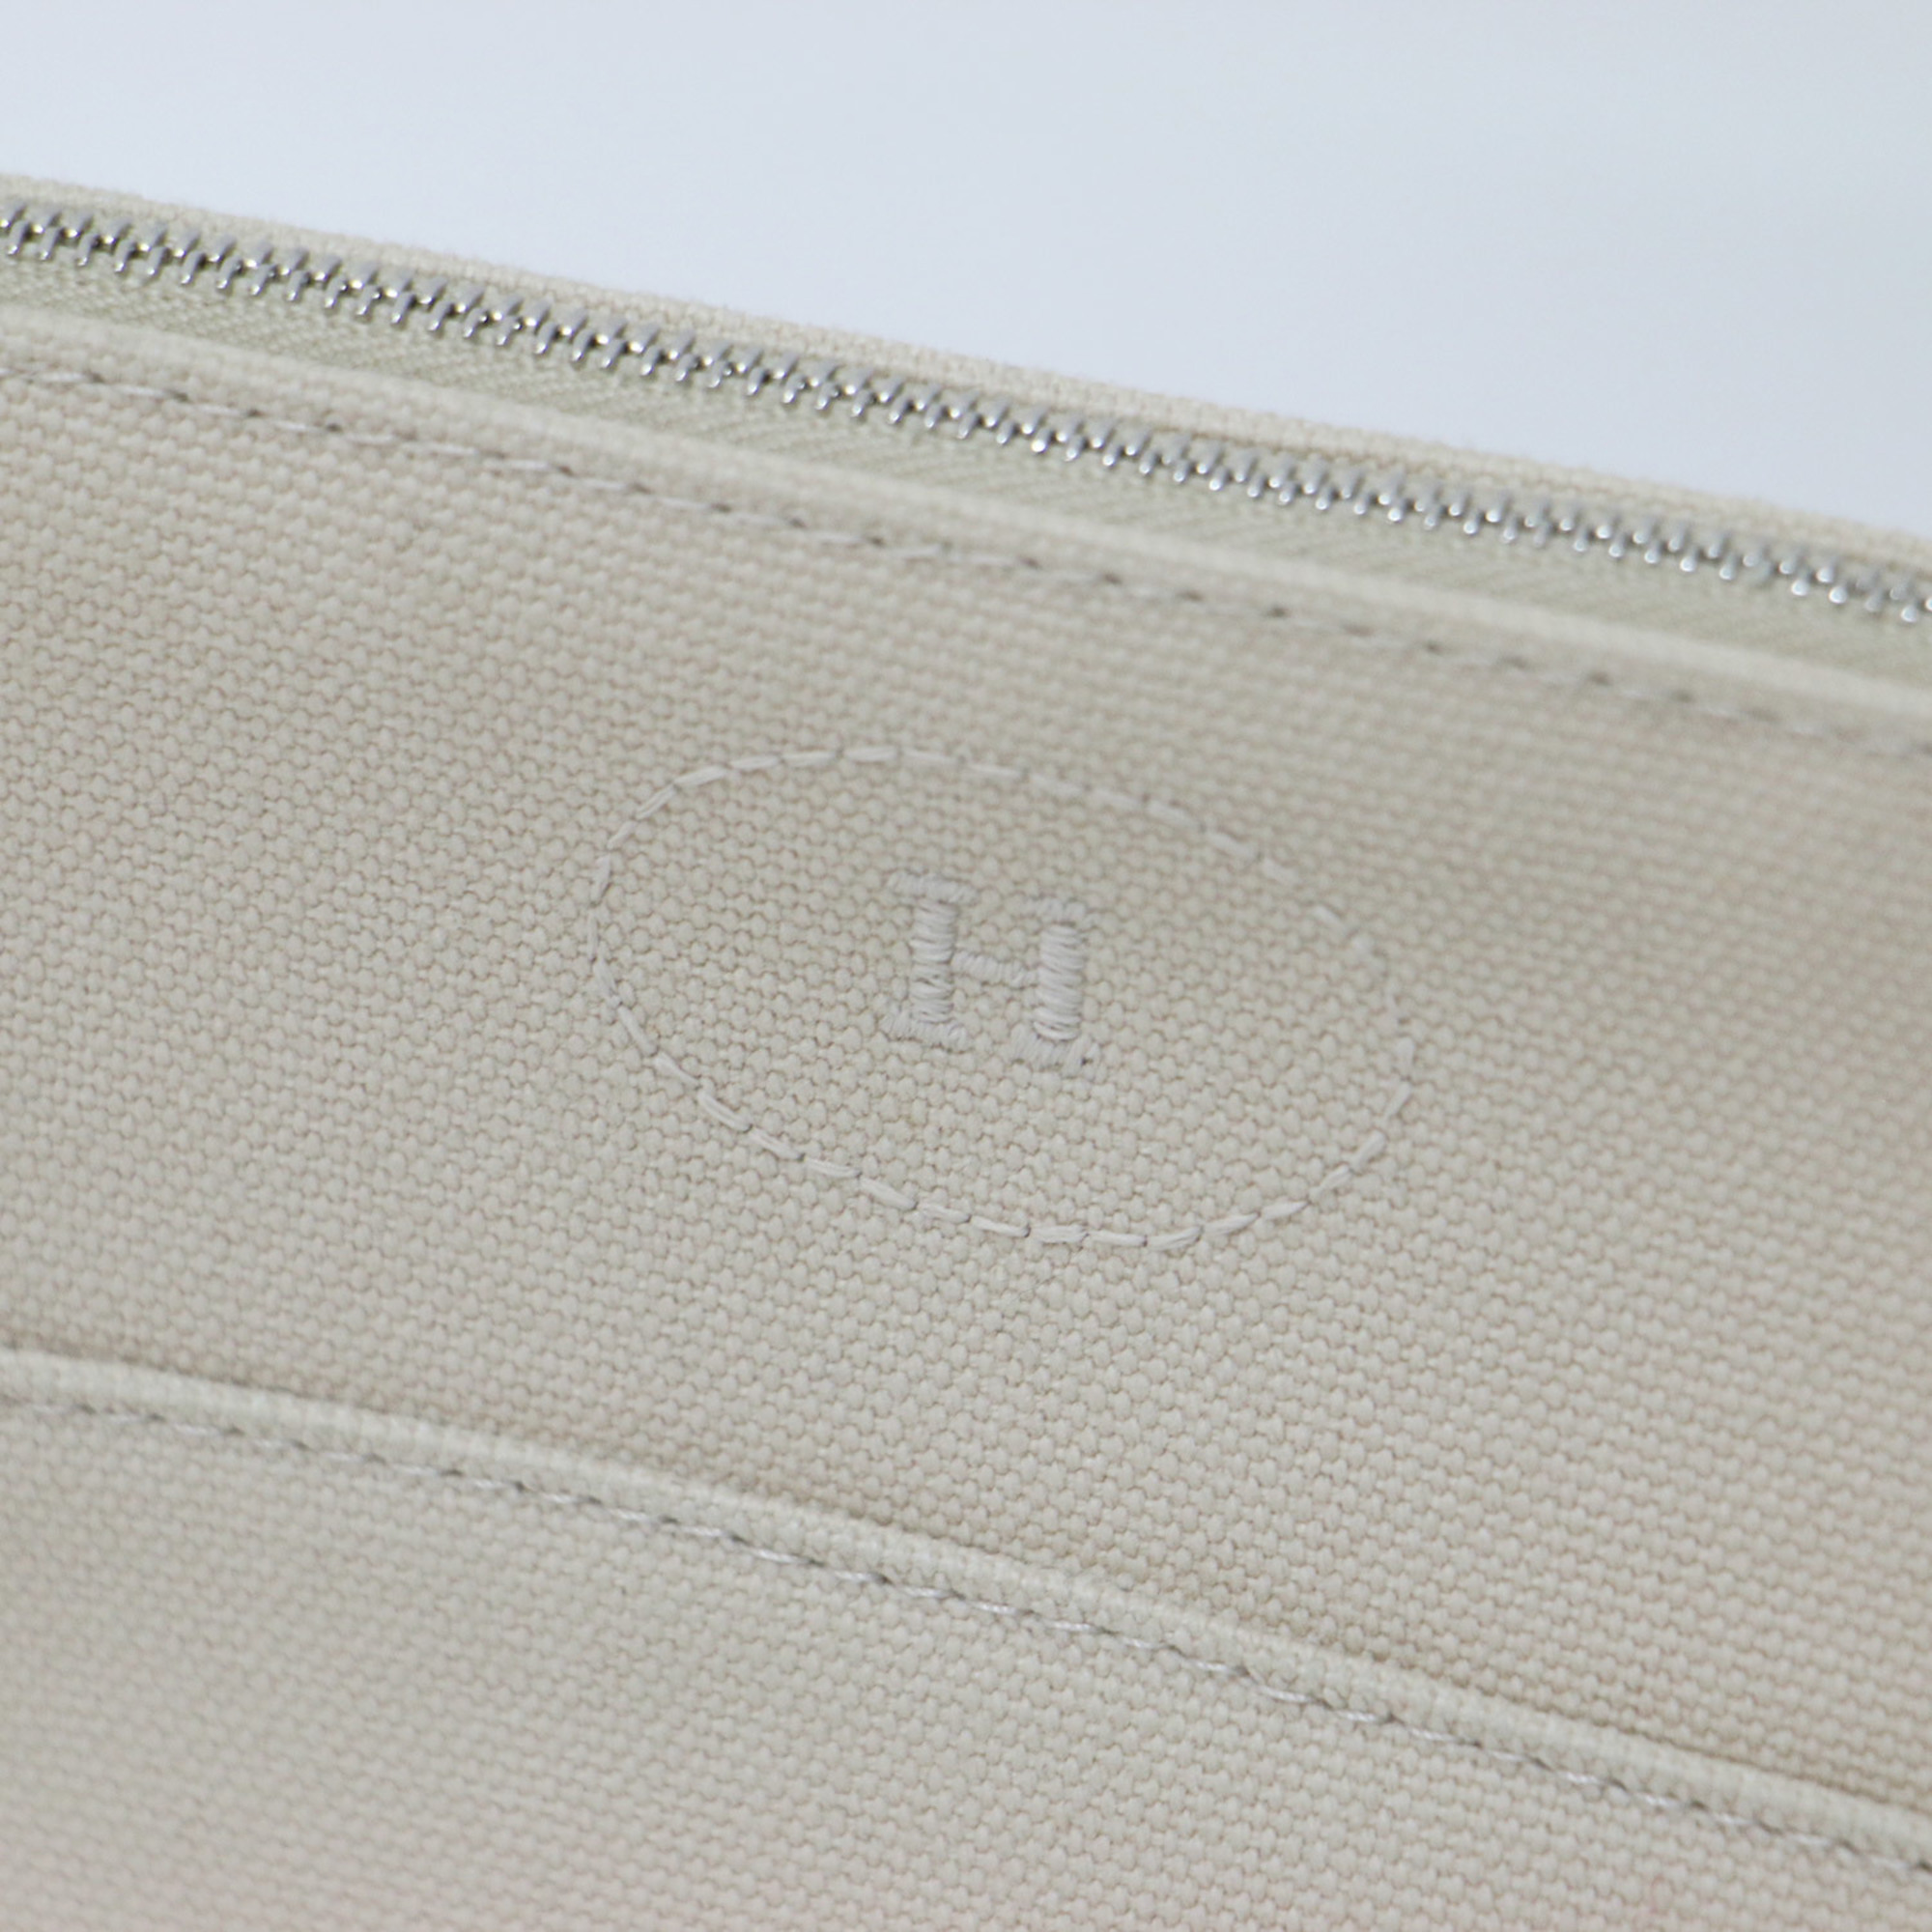 HERMES Hermes Pouch Accessory Case Light Beige Kinari Zipper Logo Embroidery Leather Piping Canvas Bolide PM 20 Mini Made in France